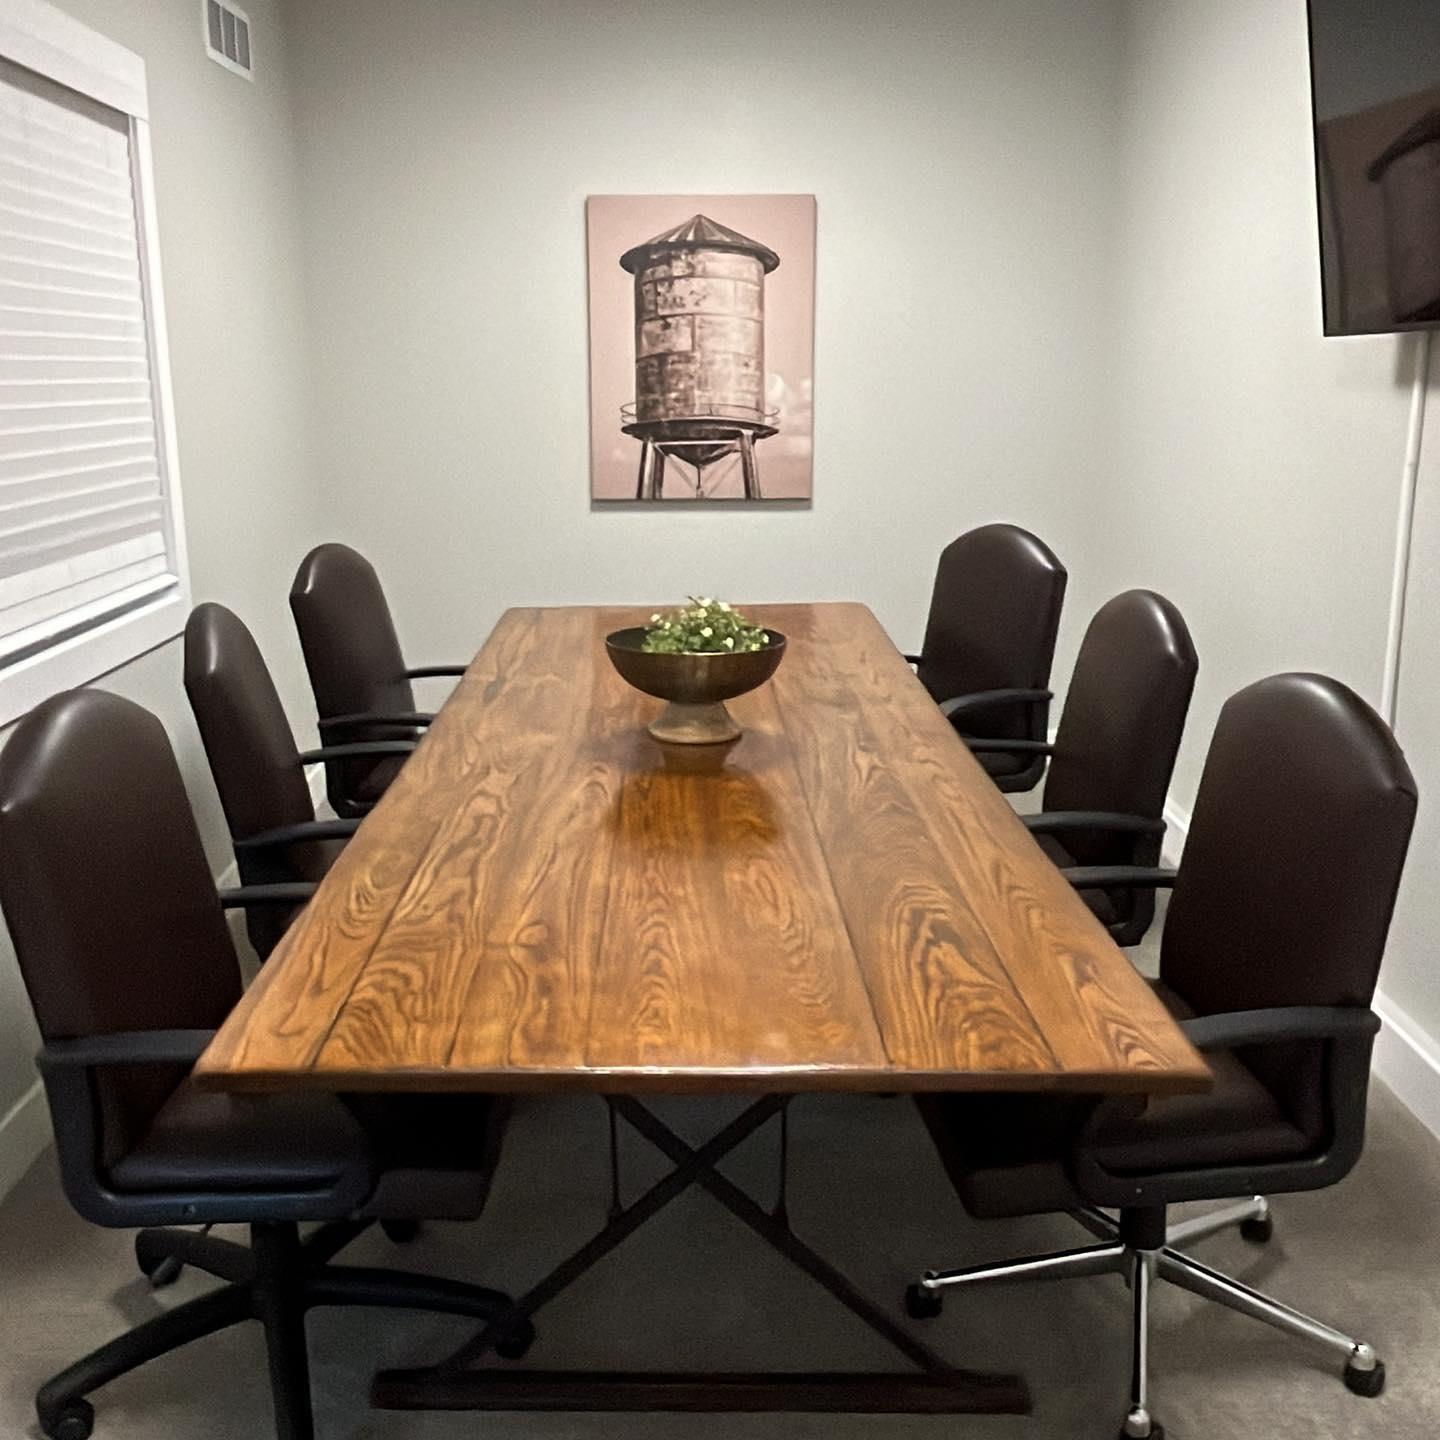 Couldn’t be happier with my refinished conference table by @tattered_creek